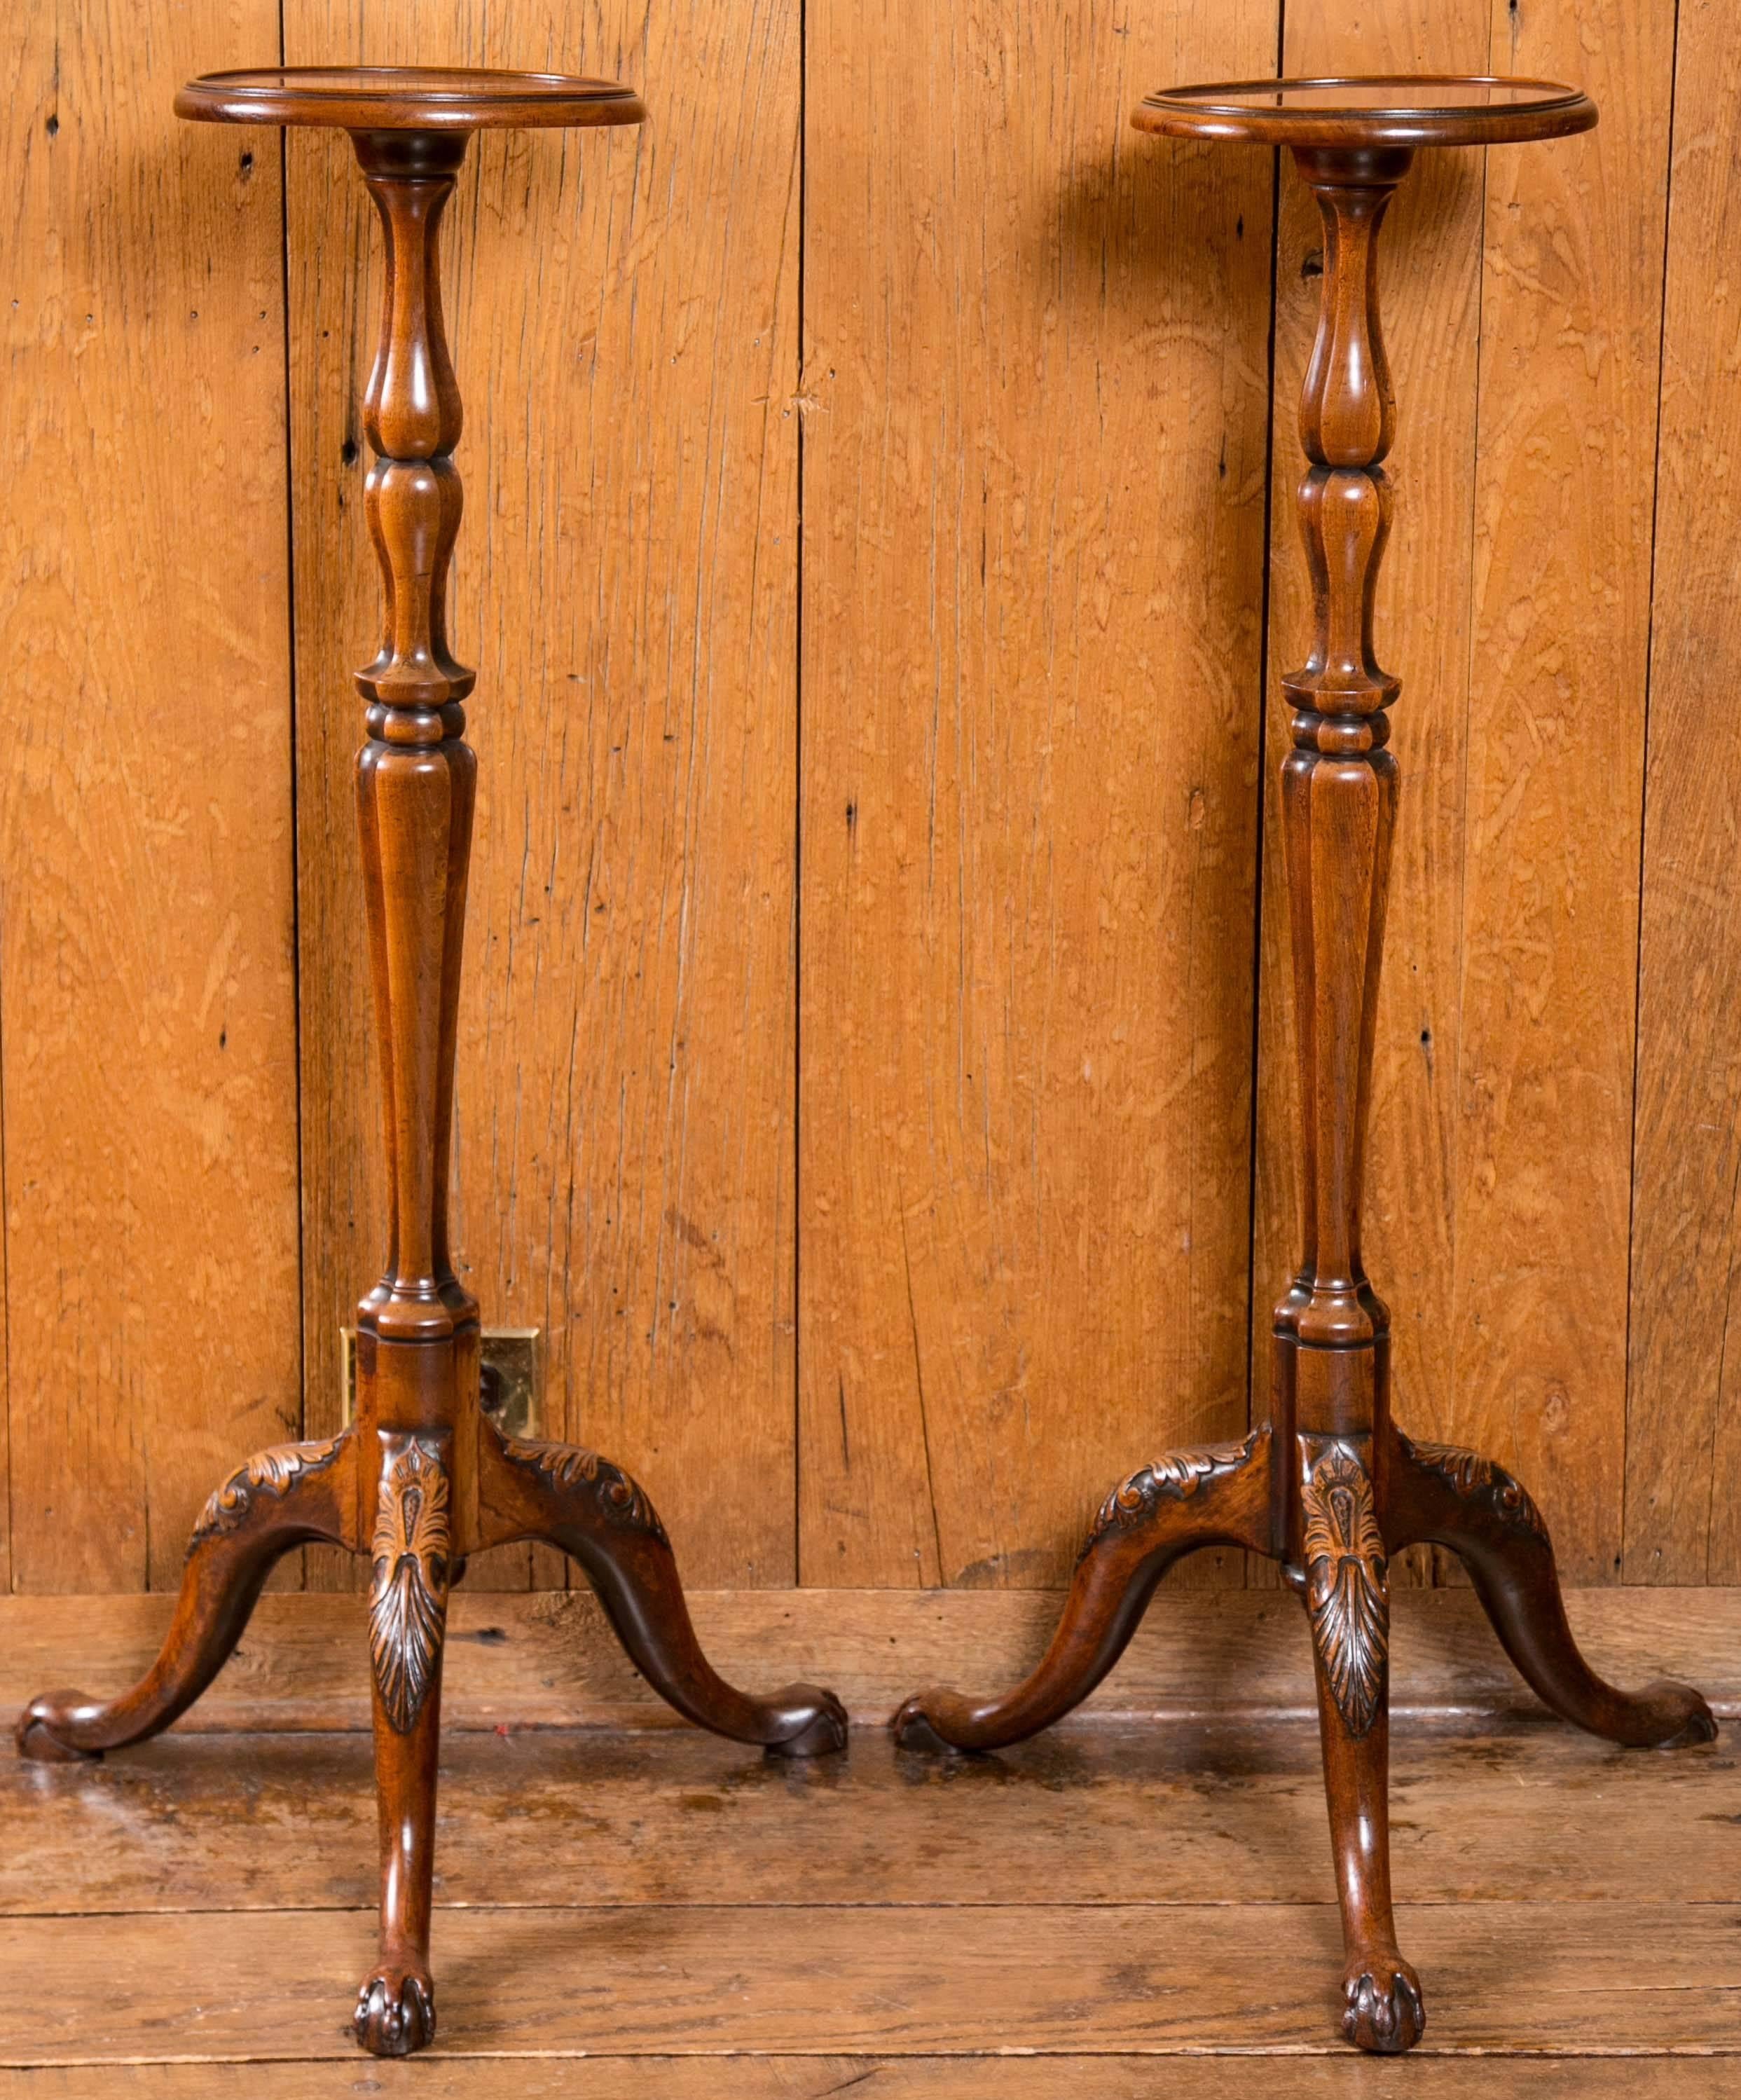 Fine pair of matching Regency candle stands with subtle lipped trays on top of unusually turned columns. Stands end with delicately carved cabriole legs with acanthus leaves on the knees and ending with ball and claw feet.